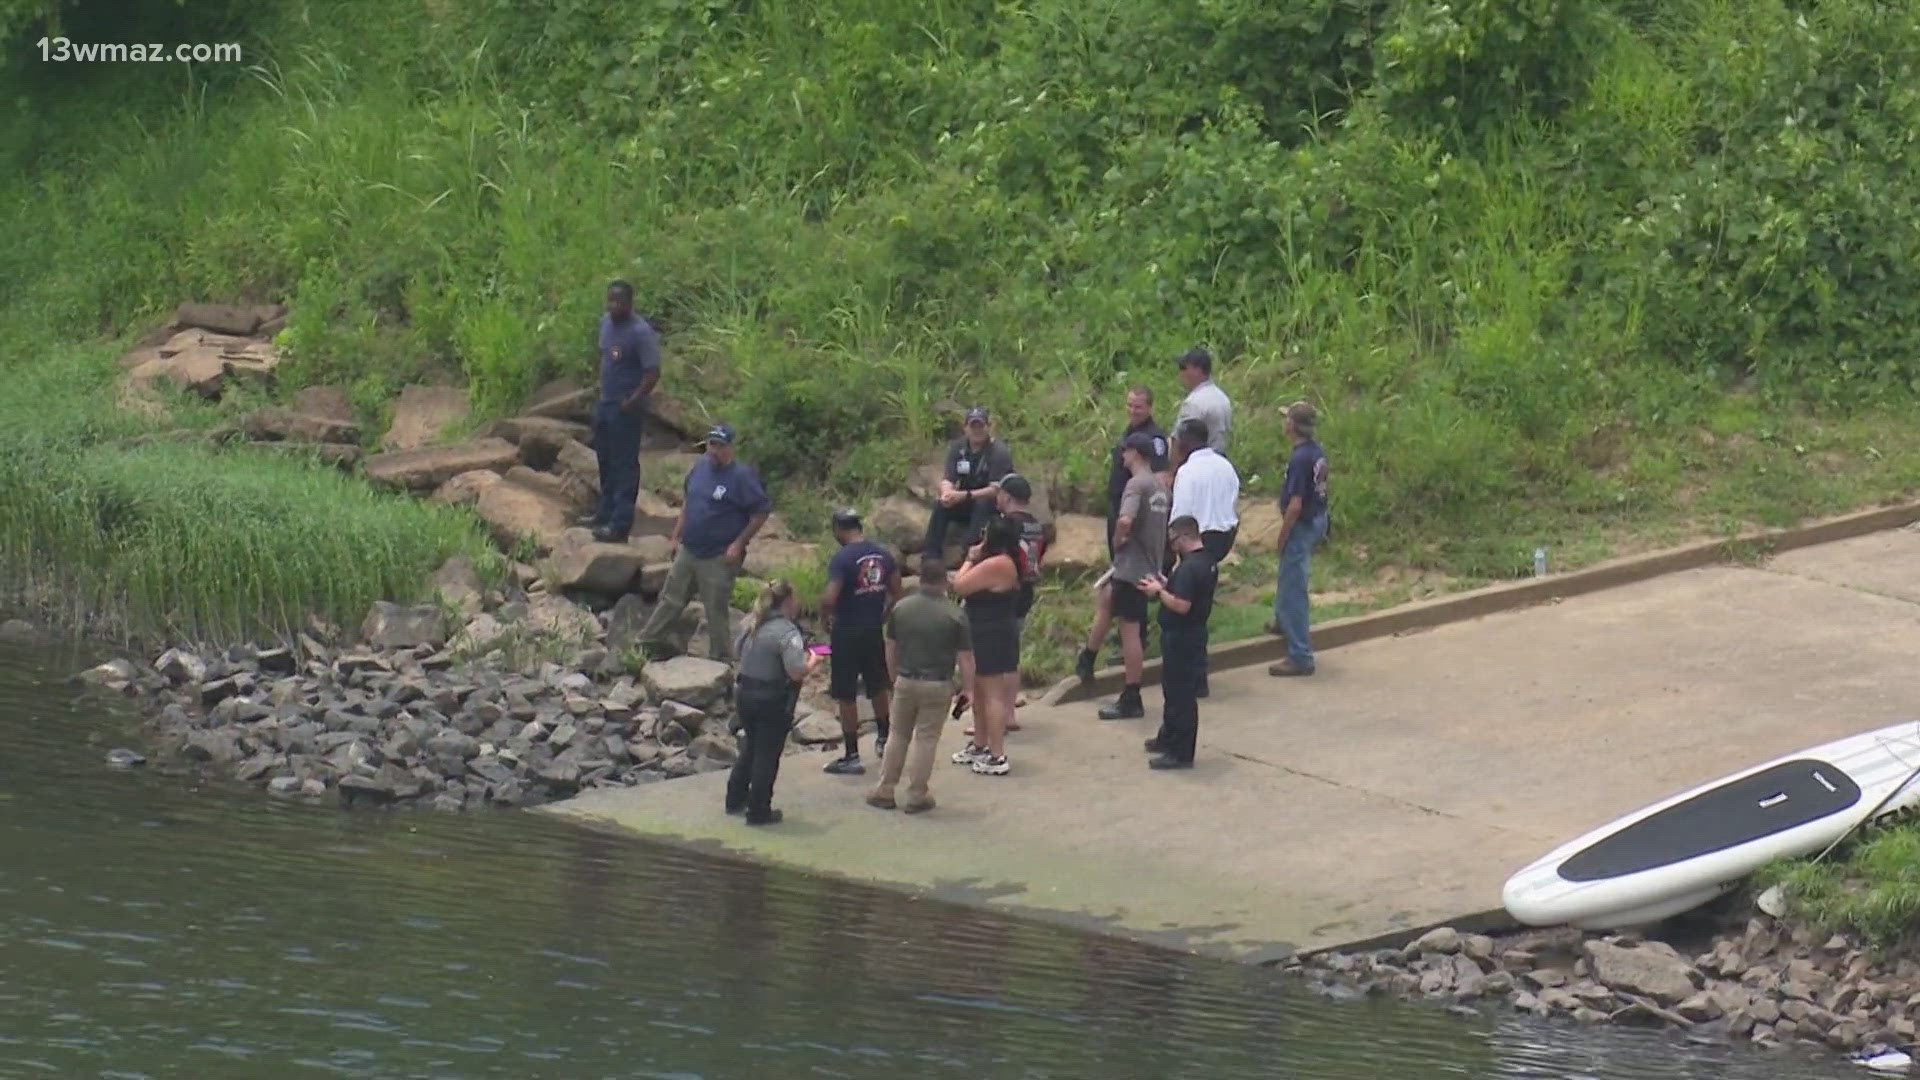 Officials spent Friday morning searching for a 26-year-old man missing in the Oconee River. They swept the shore, used Sonar and sent a dive team.